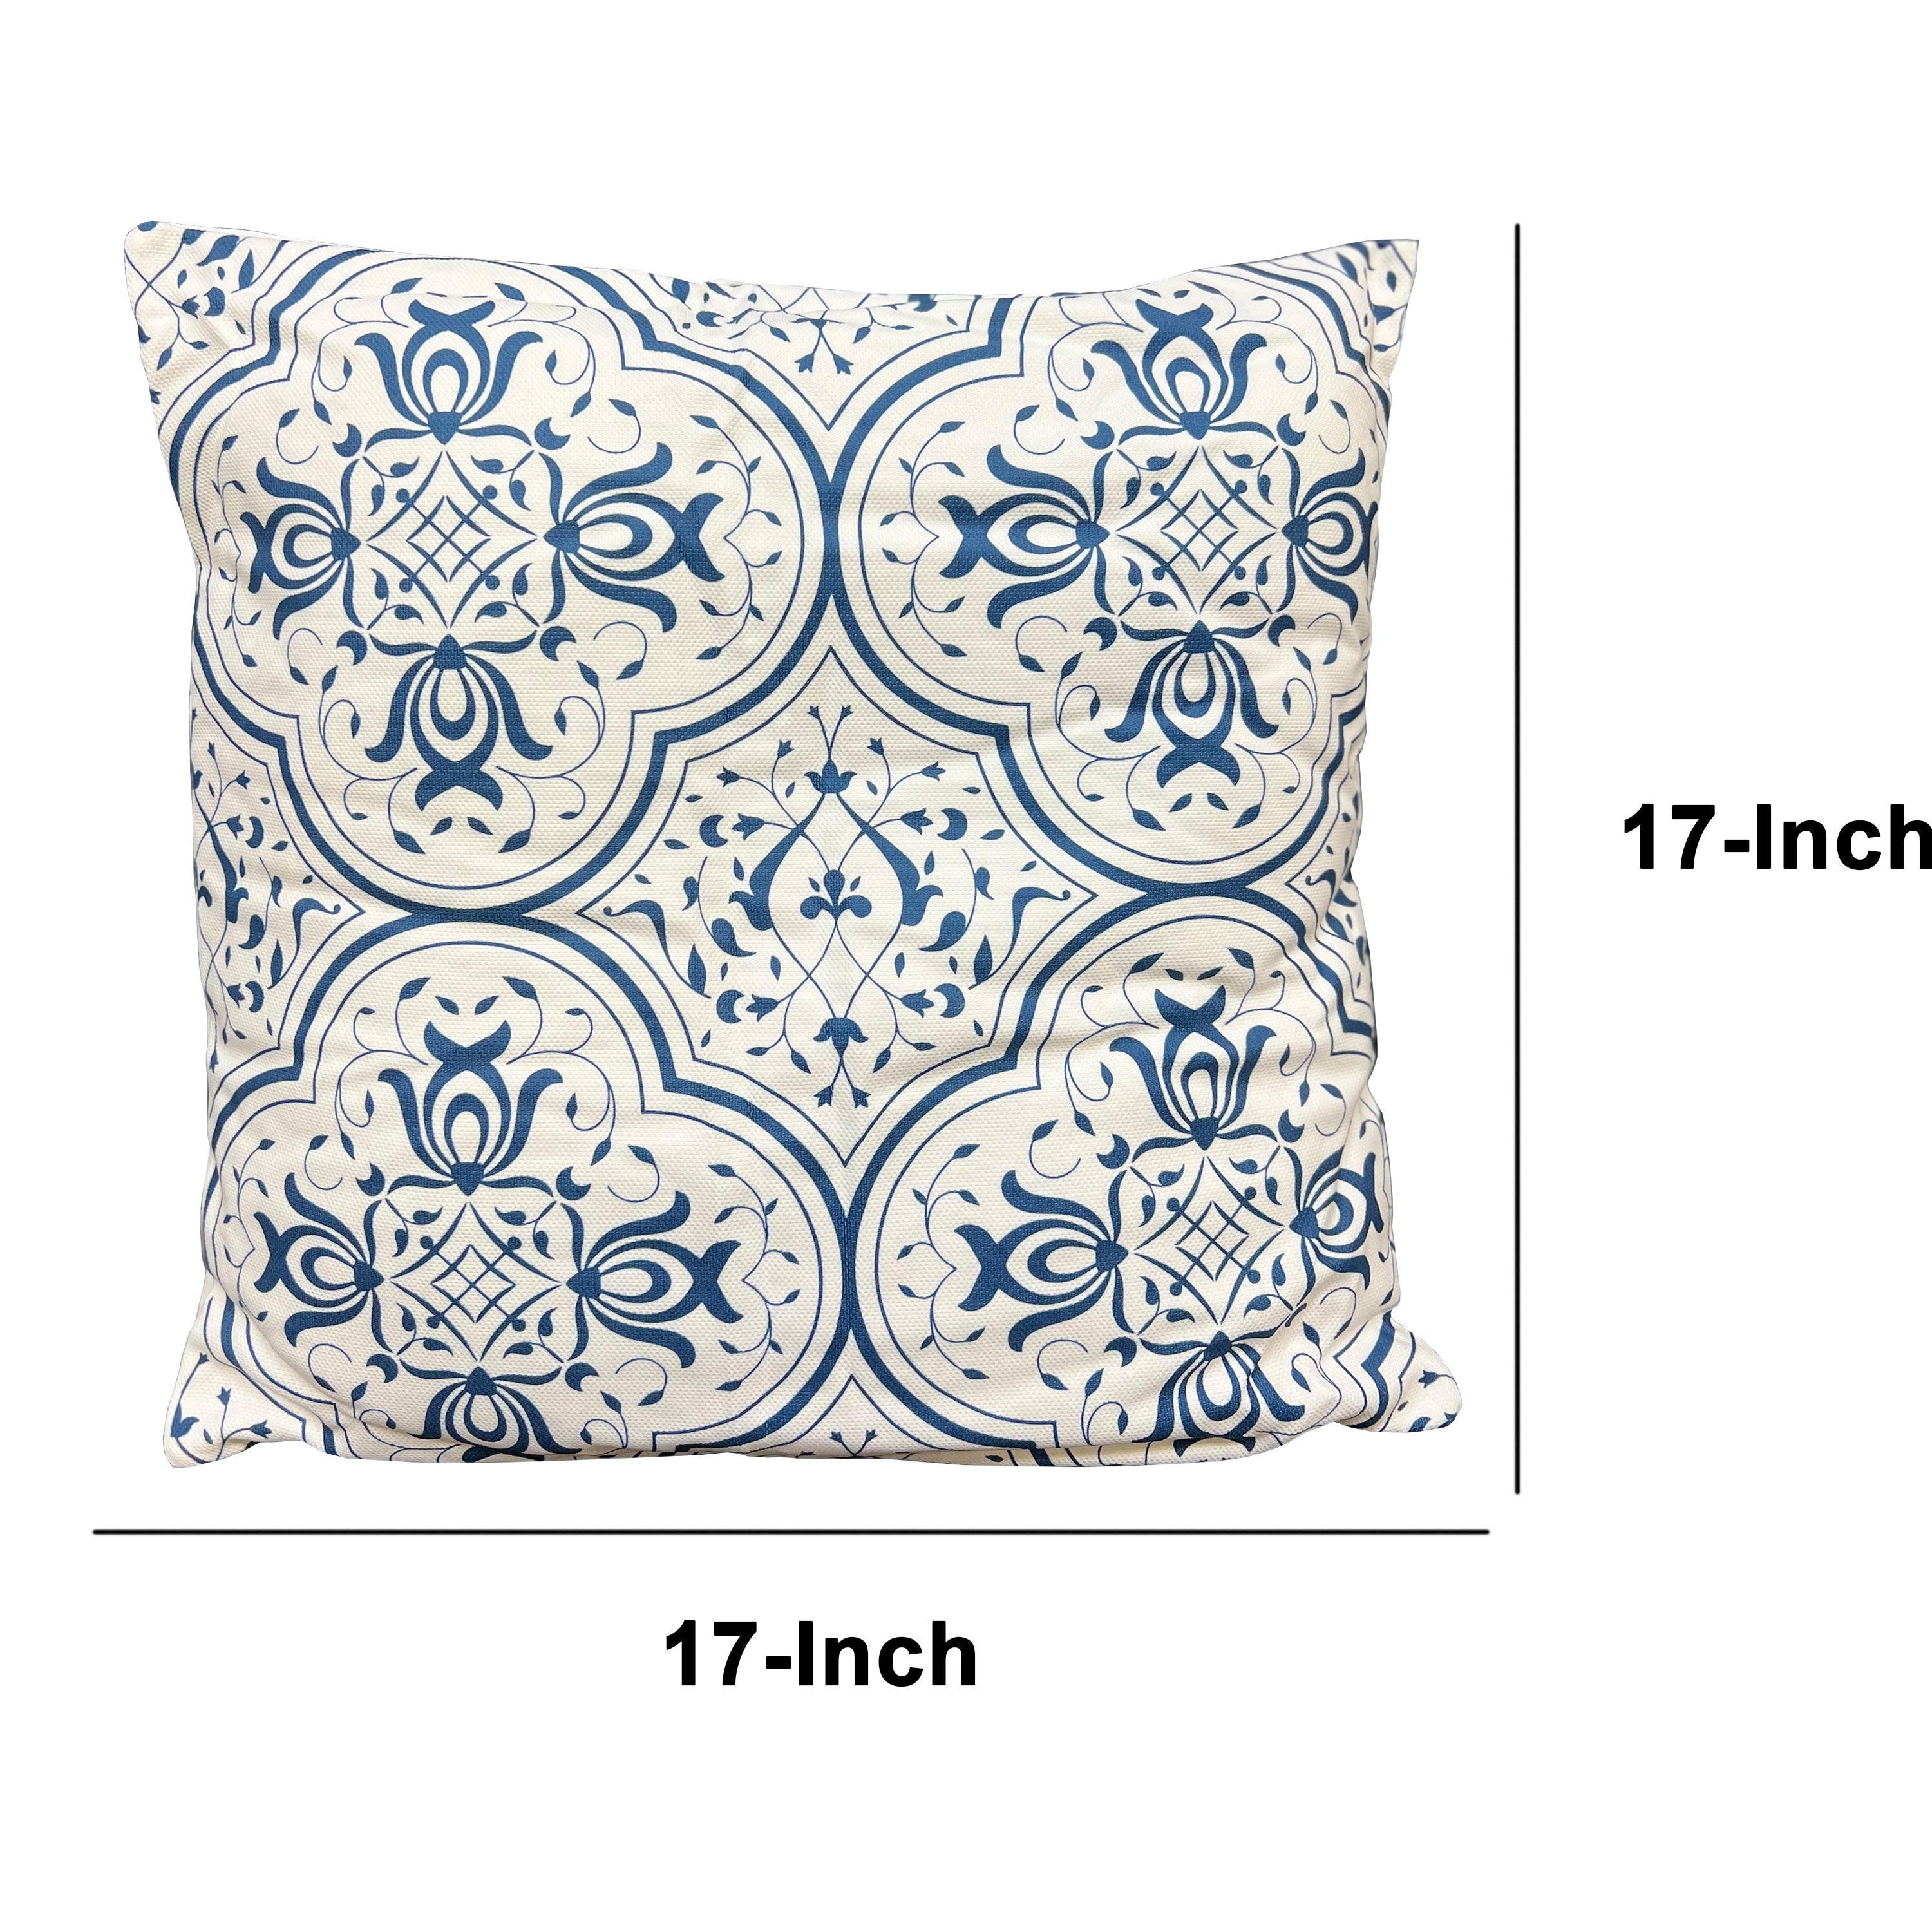 17 x 17 Inch Decorative Square Cotton Accent Throw Pillow with Classic Damask Print, Blue and White